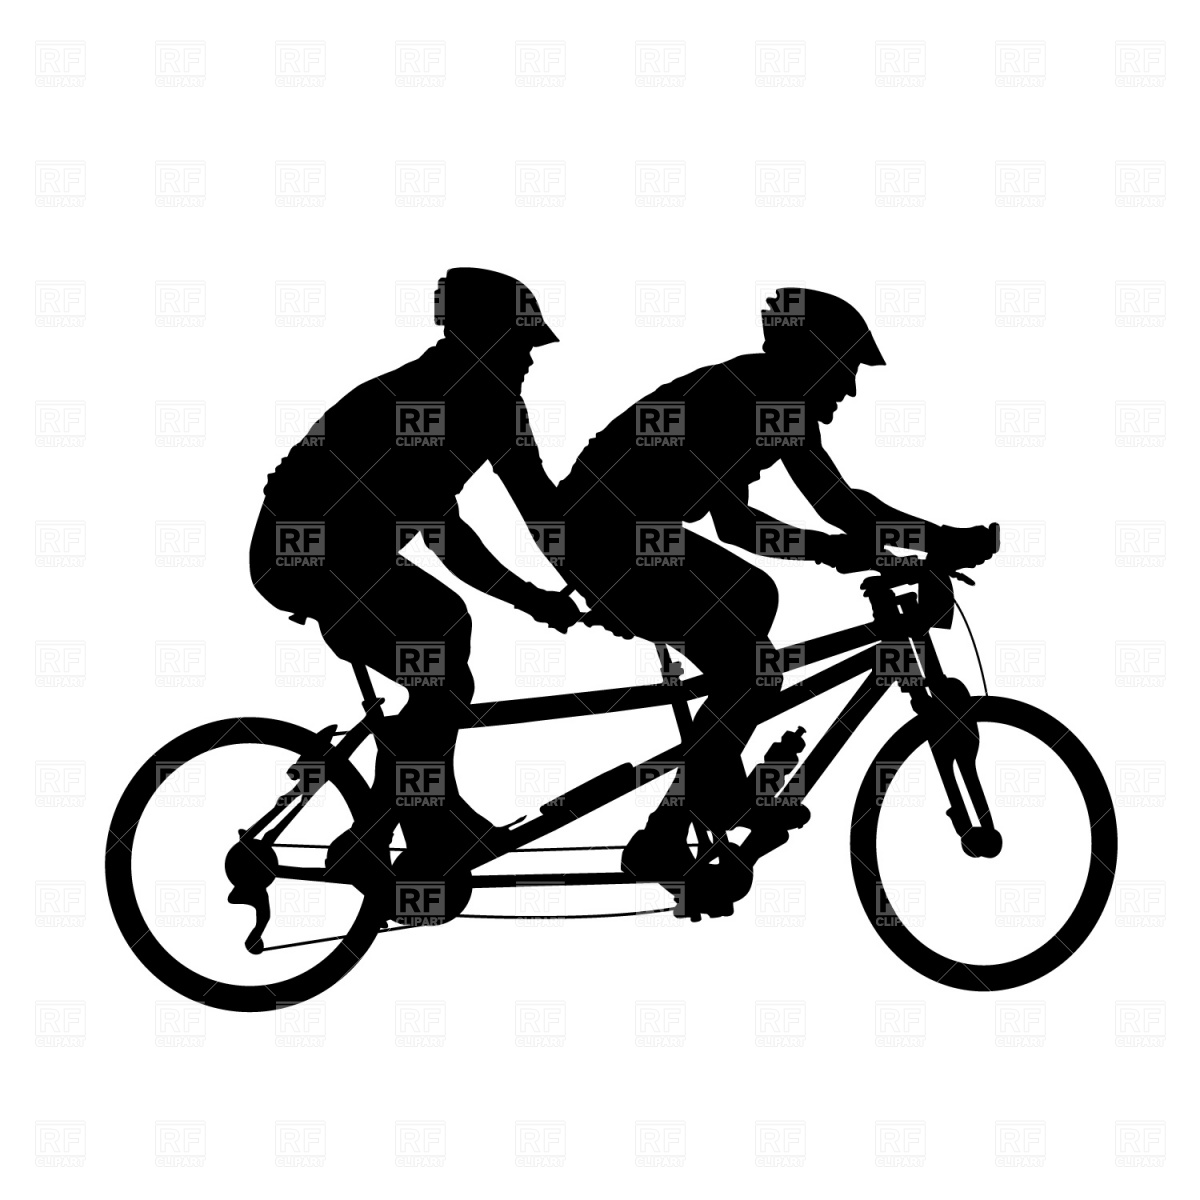 Tandem Bicycle Silhouette Download Royalty Free Vector Clipart  Eps